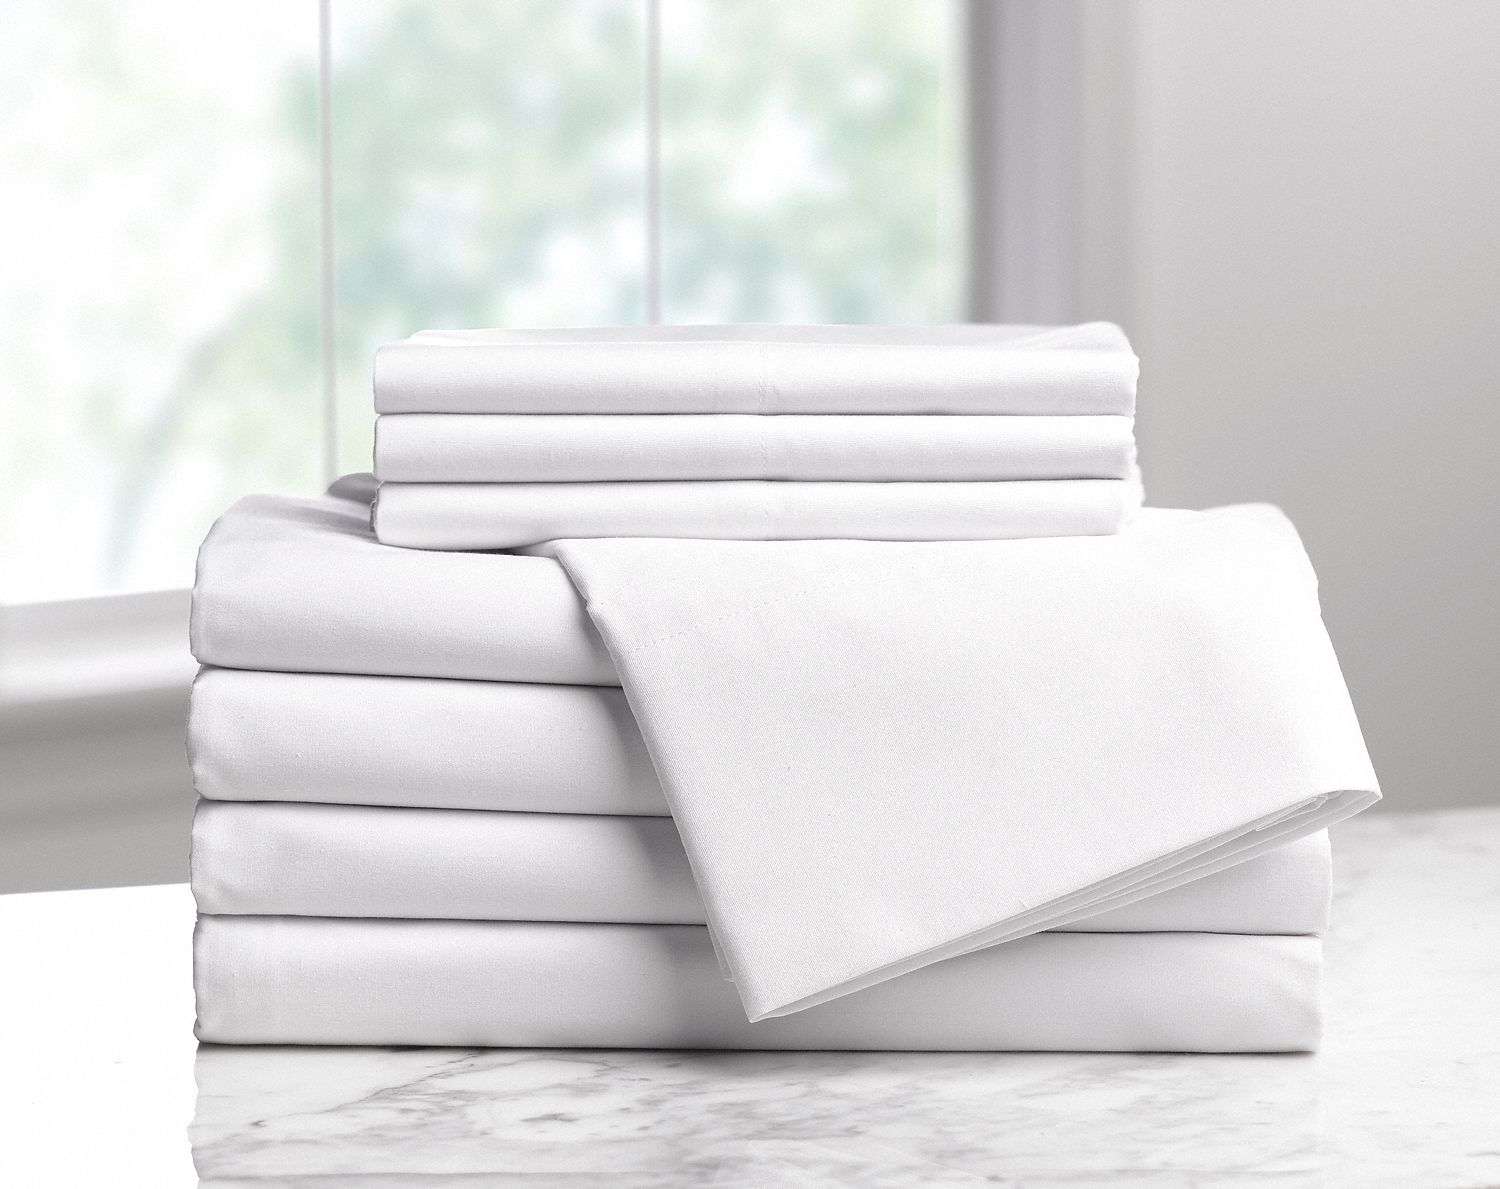 Fitted Sheet: Fitted, Queen, 60 in Wd, 80 in Lg, 60% Cotton/40% Polyester Fabric, T200, 6 PK